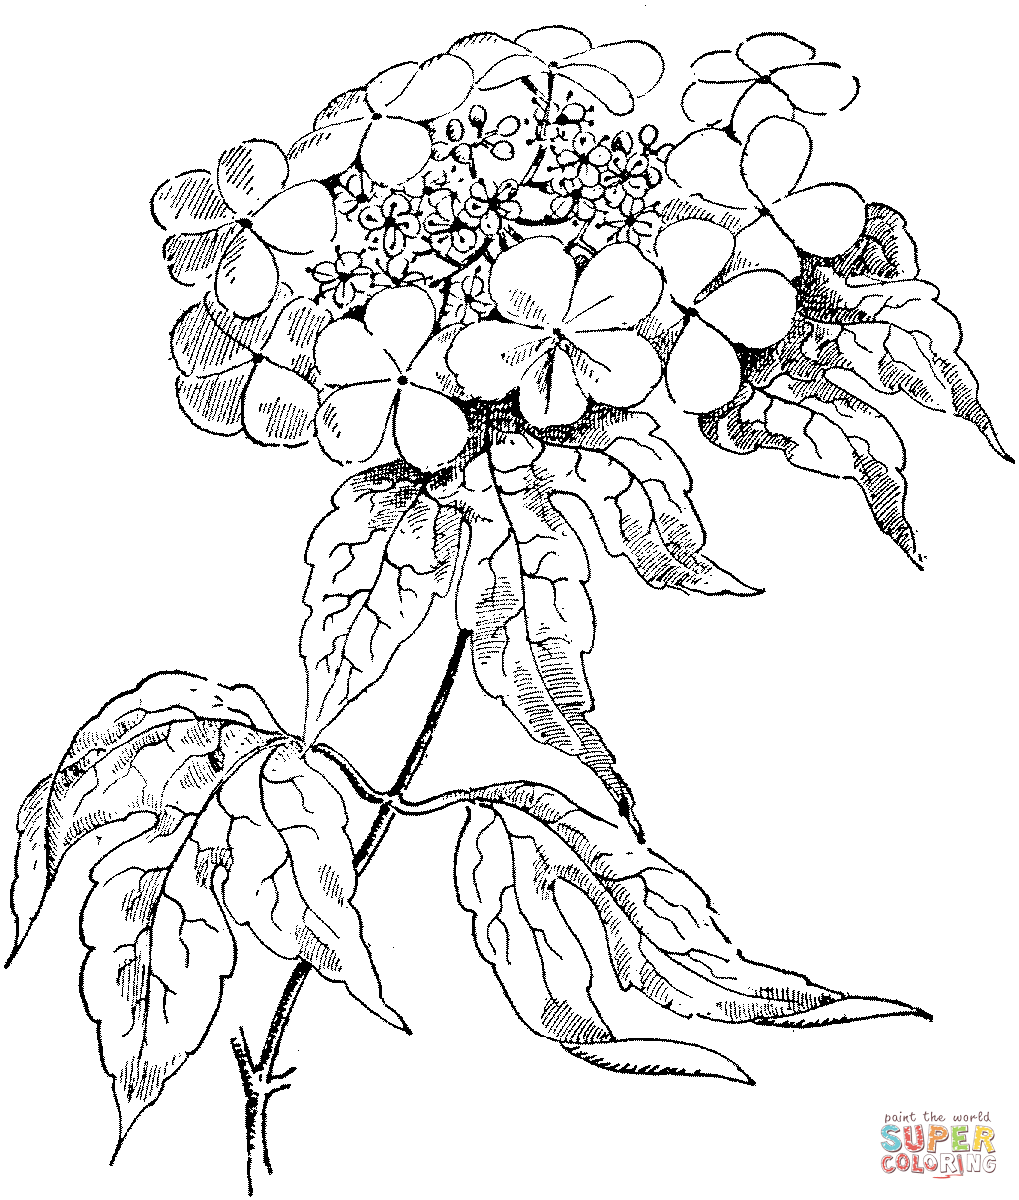 Viburnum Opulus or Guelder Rose Coloring Pages